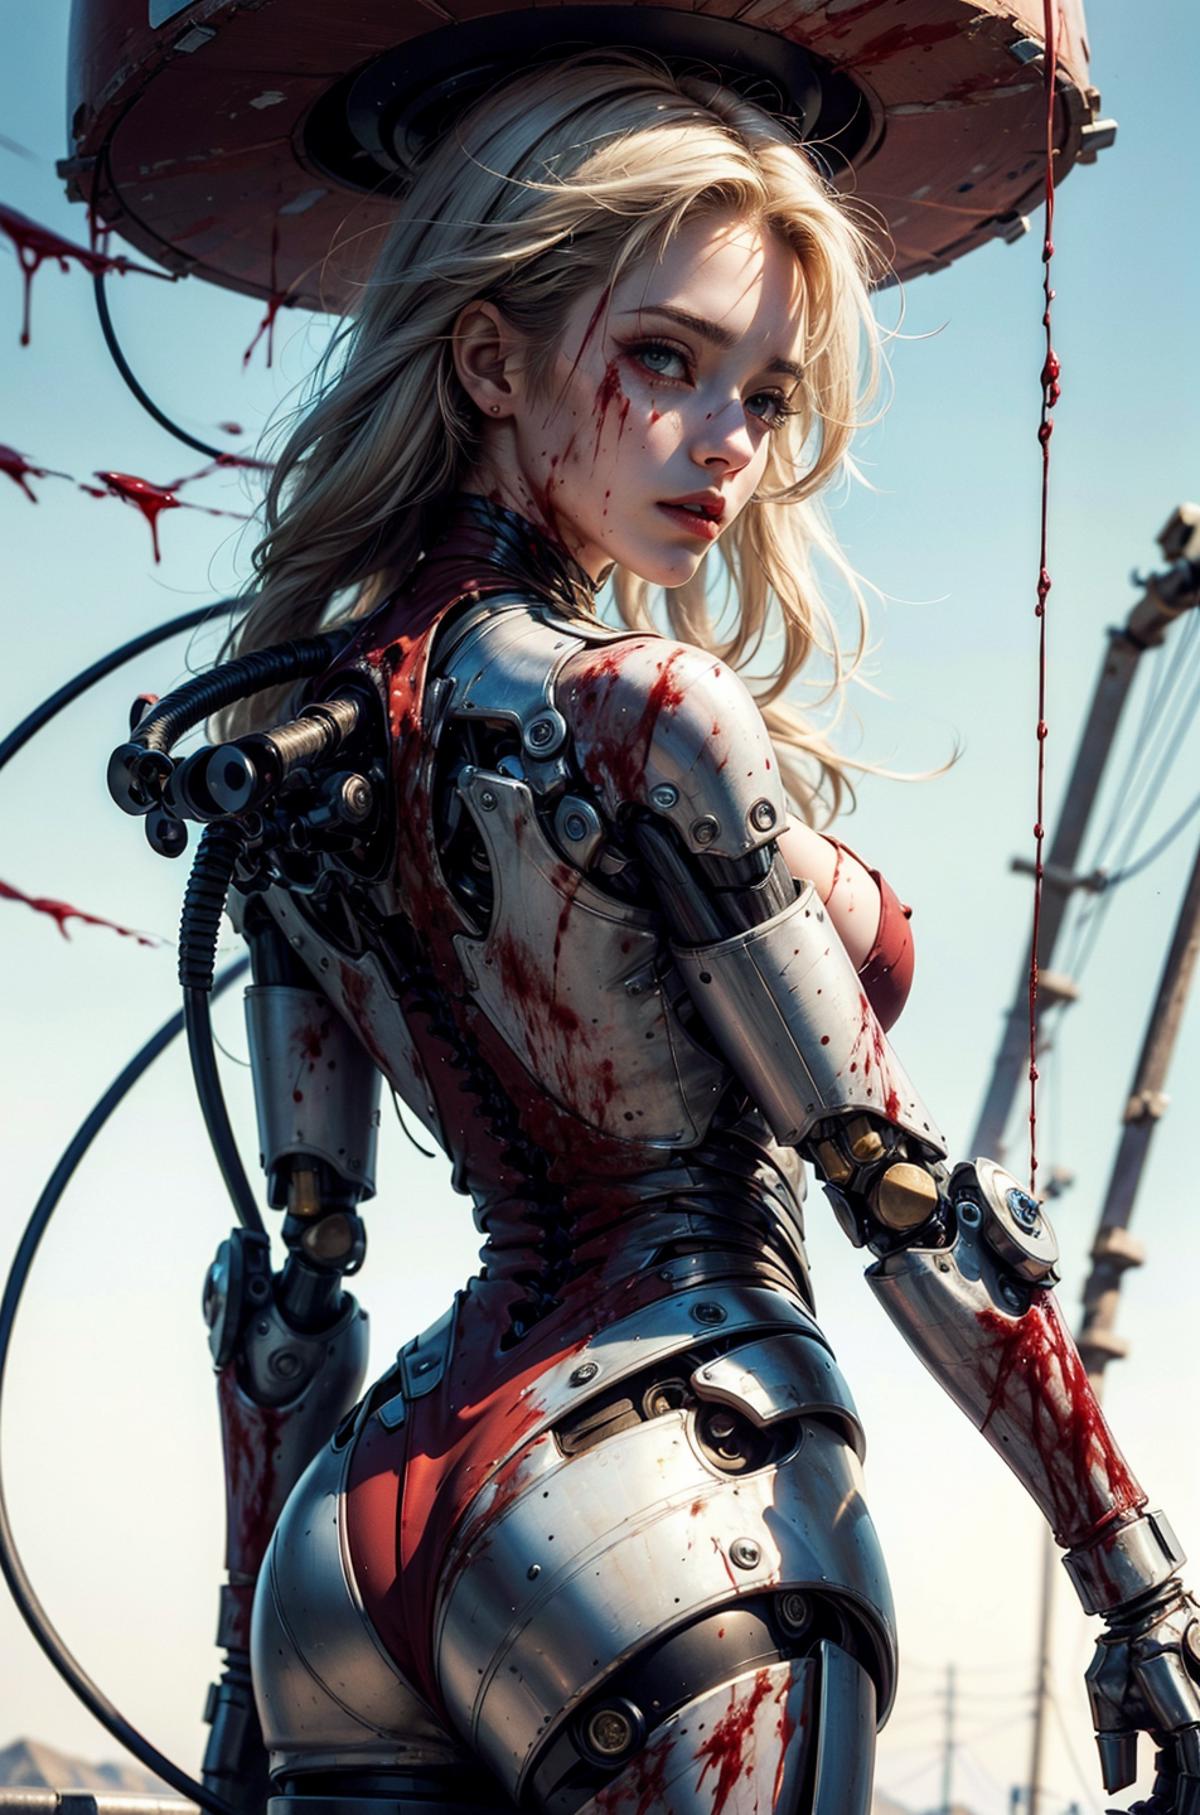 A woman in a metal suit with blood and wires on her.